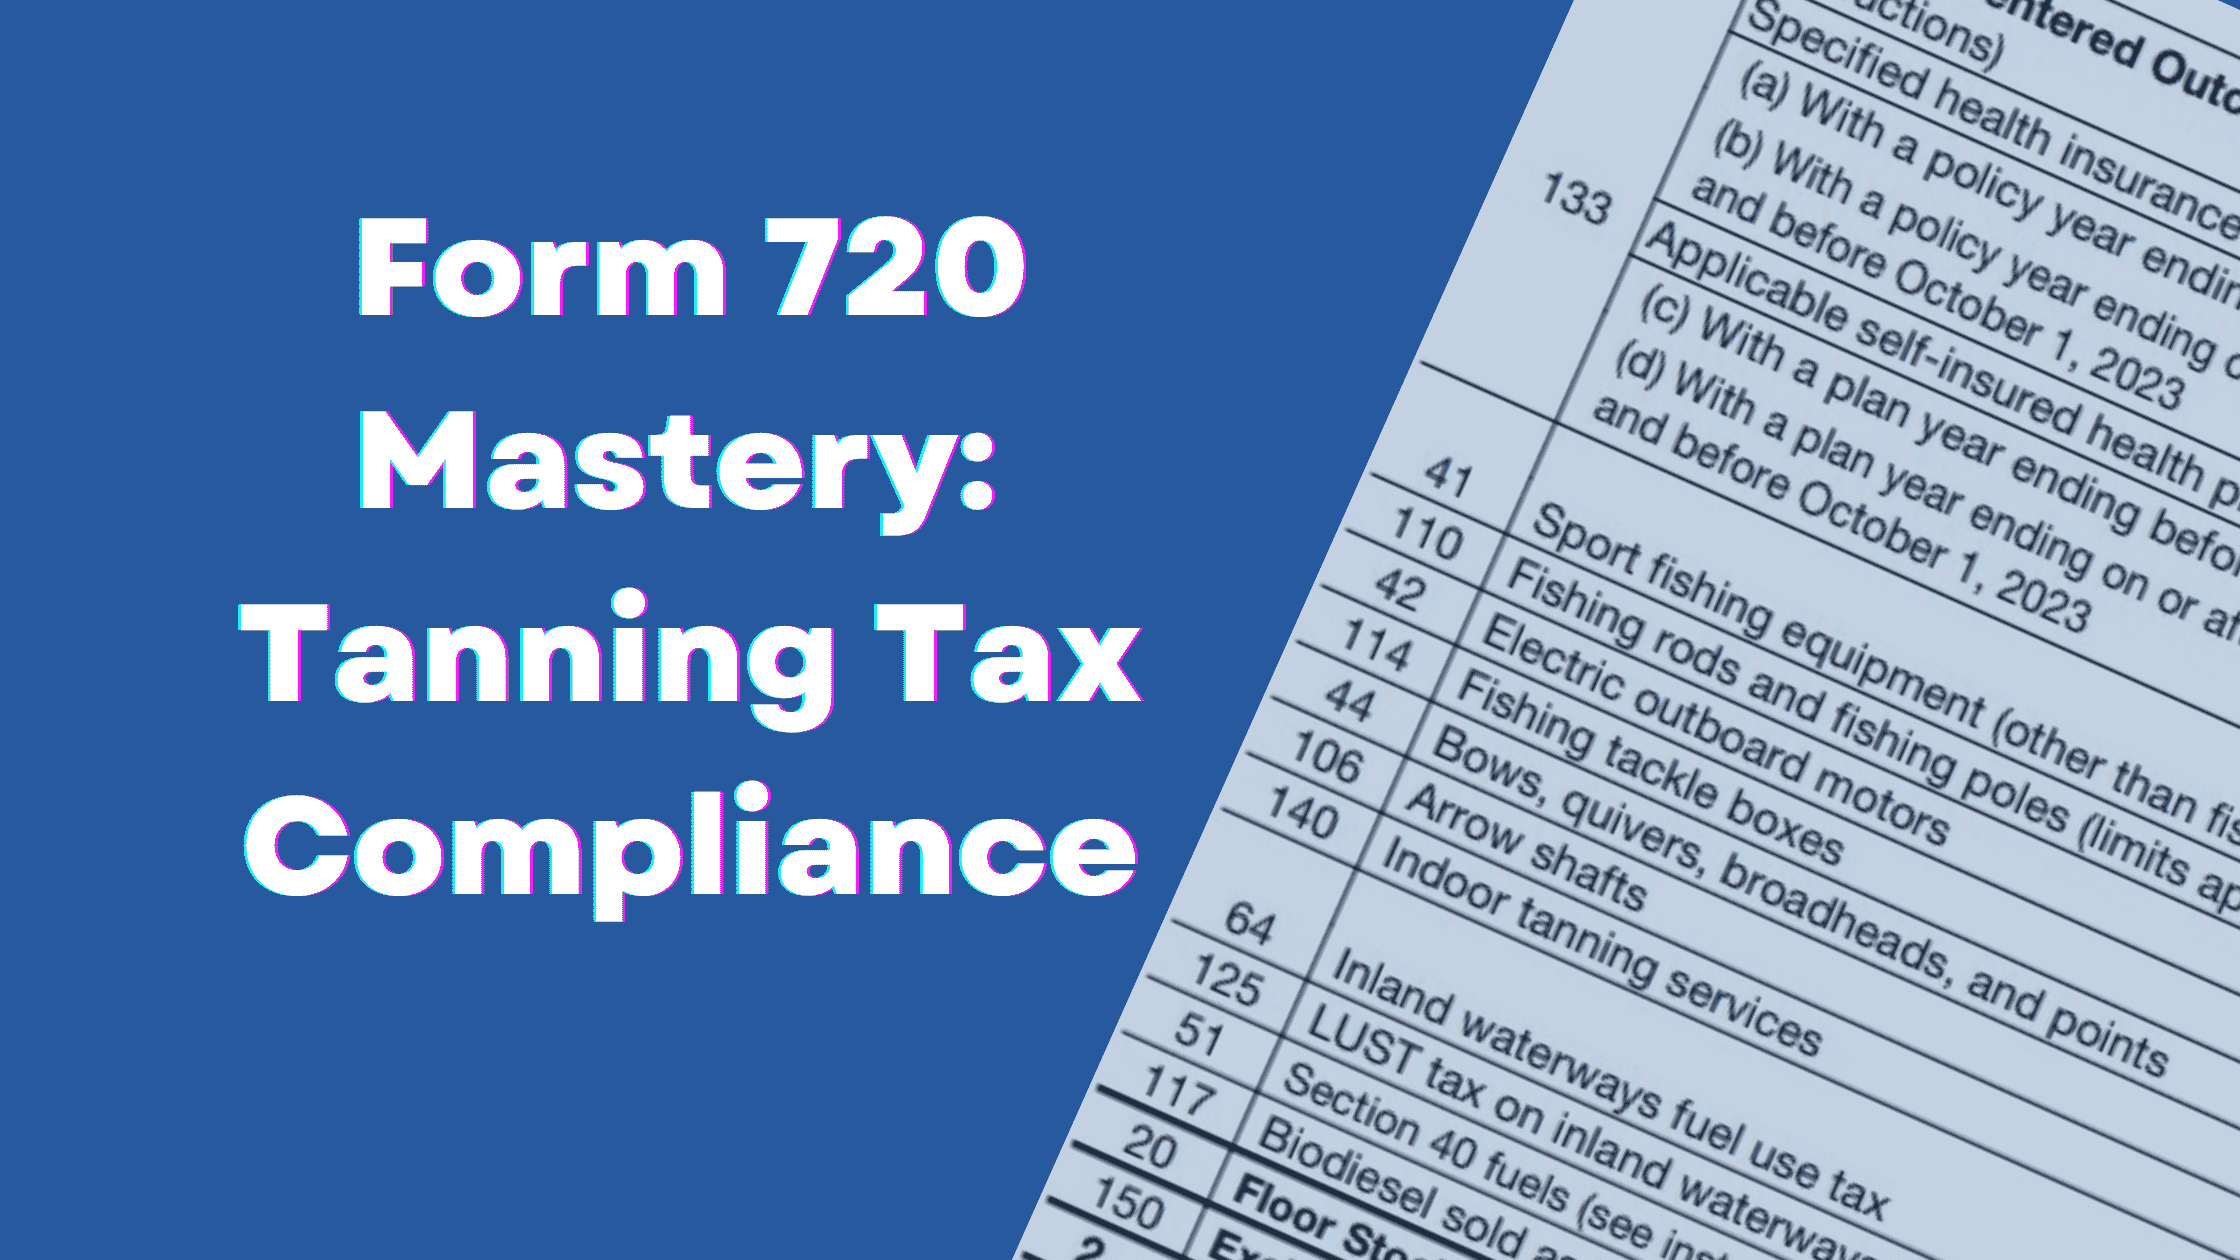 Form 720 Mastery: Tanning Tax Compliance